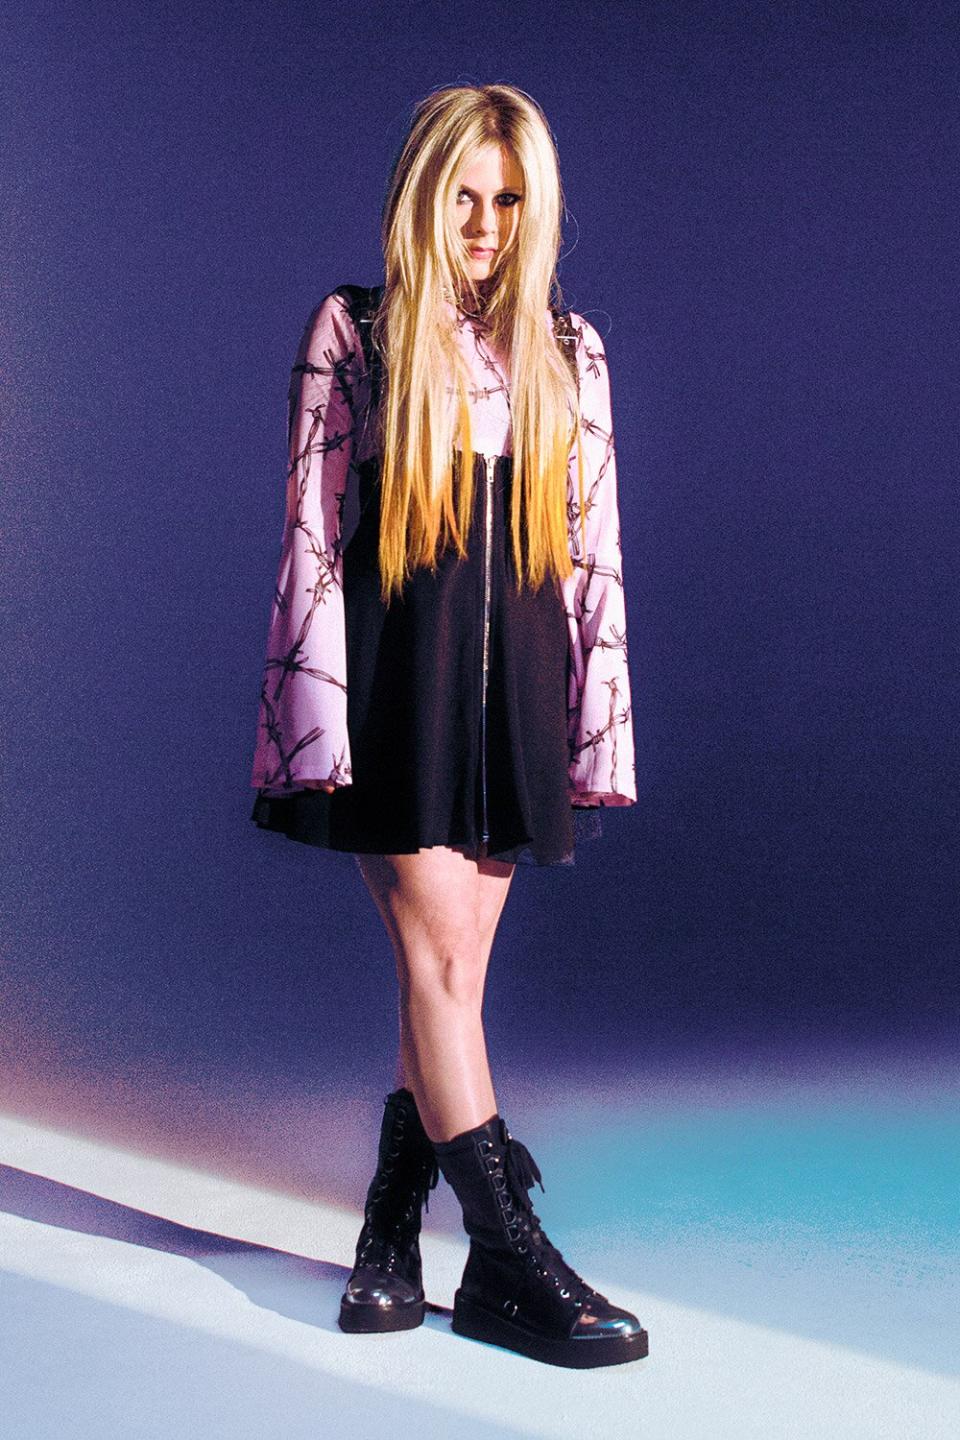 Avril Lavigne Says She Goes for 'Comfort' When Putting Together a Look: 'I F---ing Hate Heels'